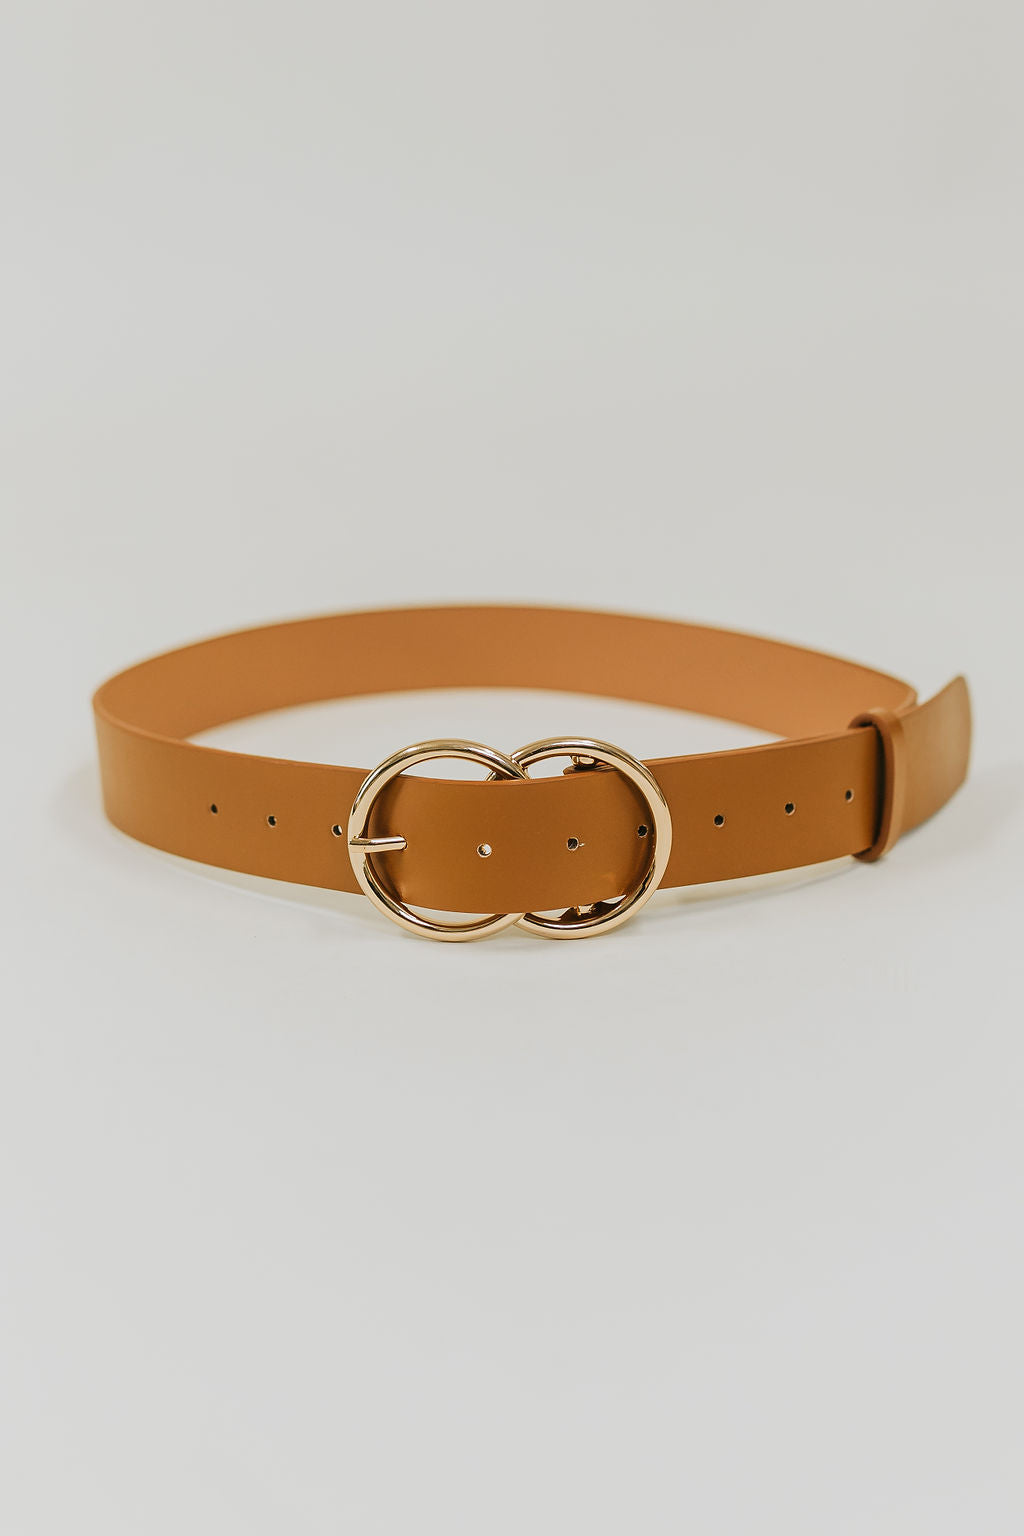 Thick Double Ring Belt - Tan